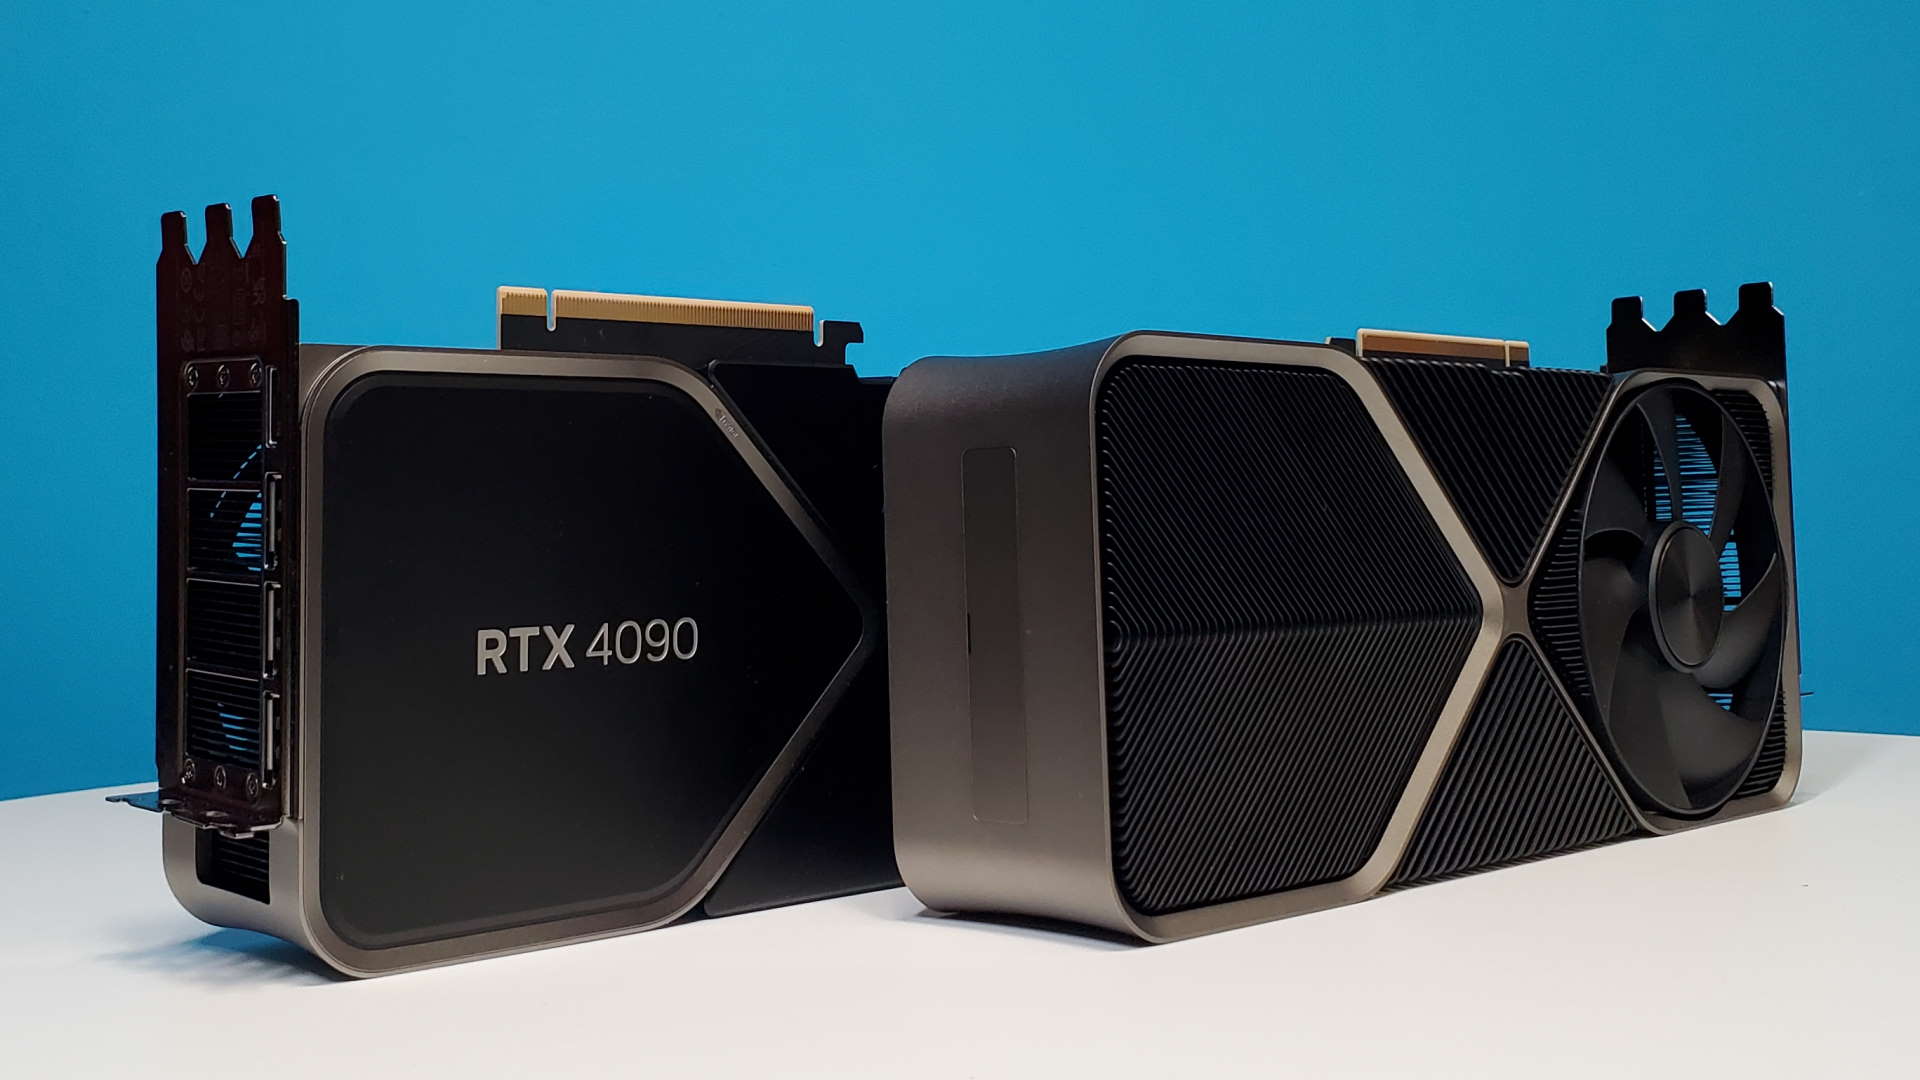  Nvidia says 83% of RTX 40-series gamers enable ray tracing 